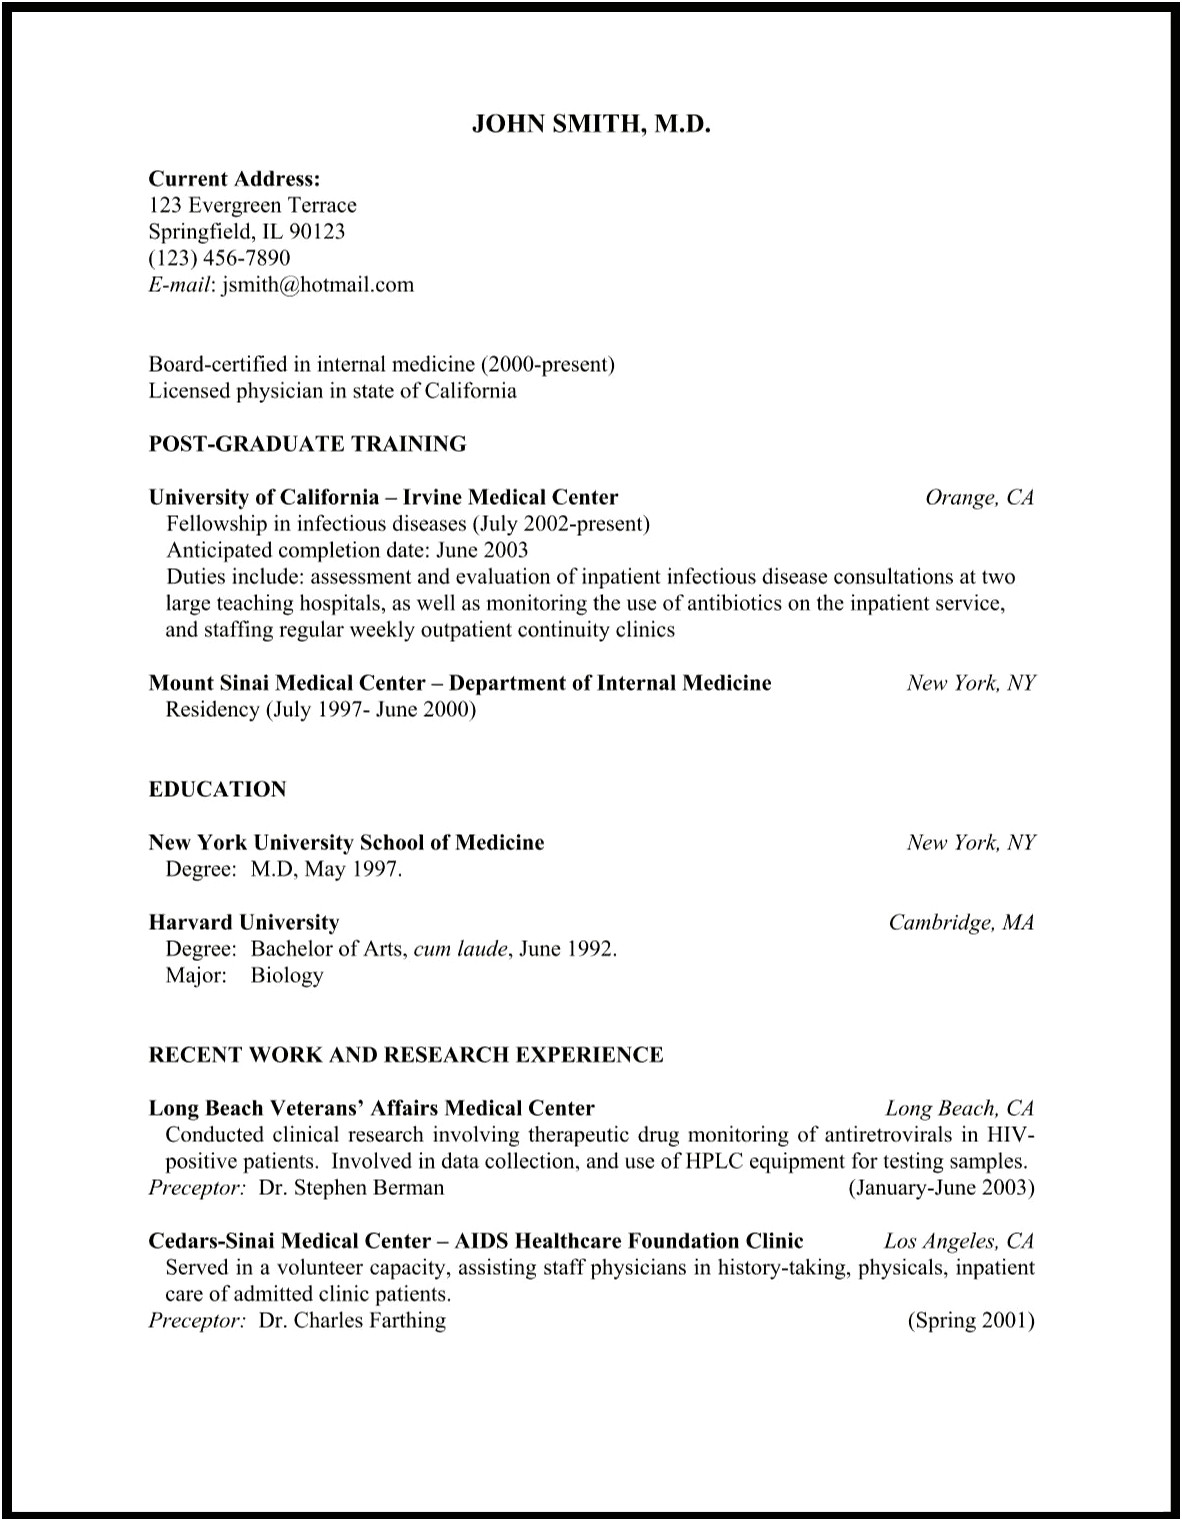 Examples Of Short Resumes For Doctor